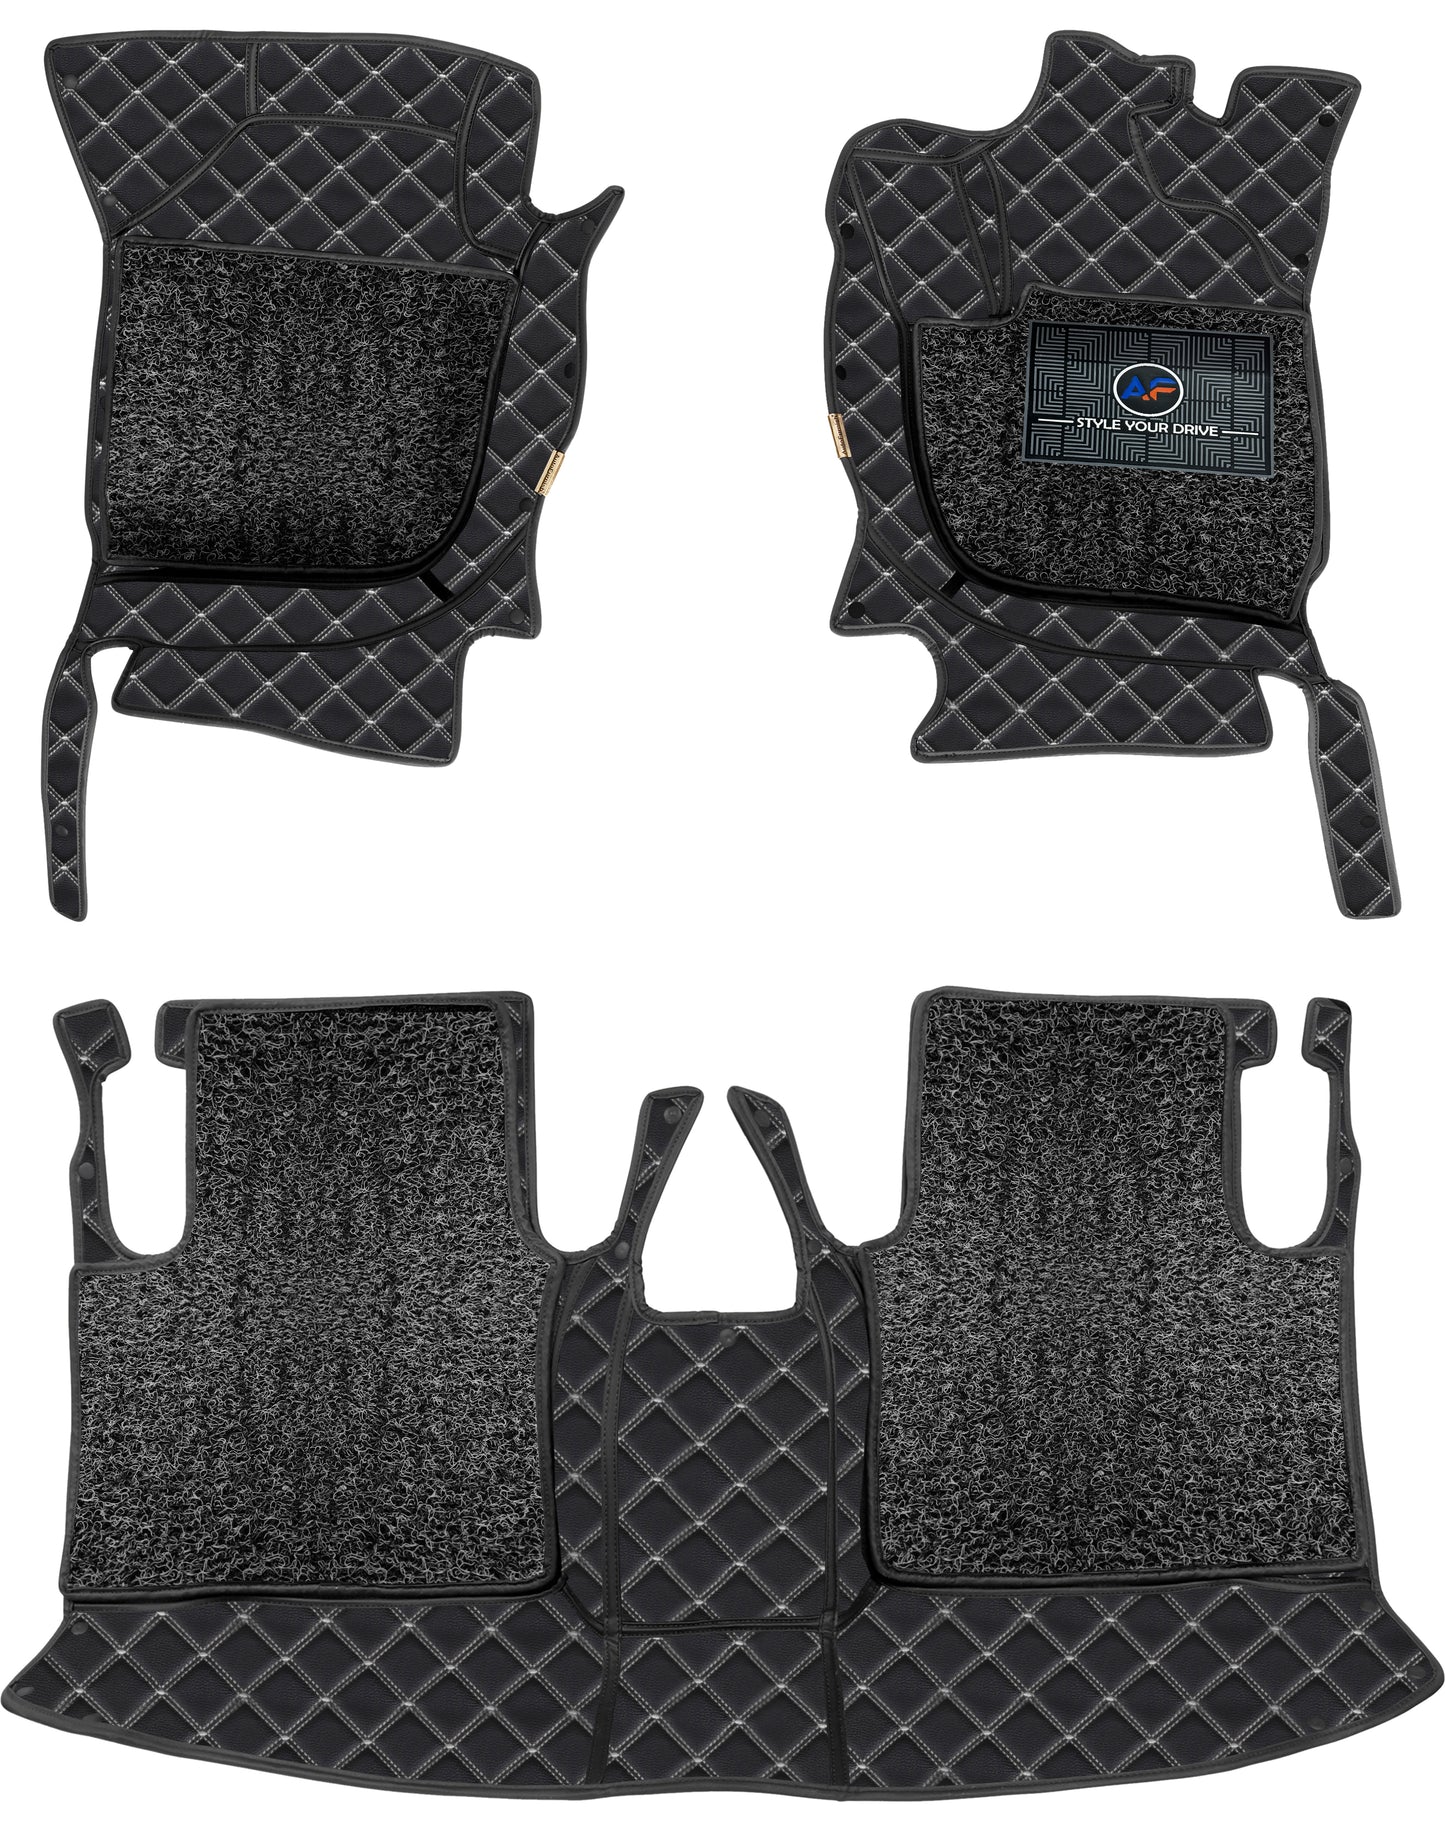 Volkswagen Virtus 2022-7D Luxury Car Mat, All Weather Proof, Anti-Skid, 100% Waterproof & Odorless with Unique Diamond Fish Design (24mm Luxury PU Leather, 2 Rows)